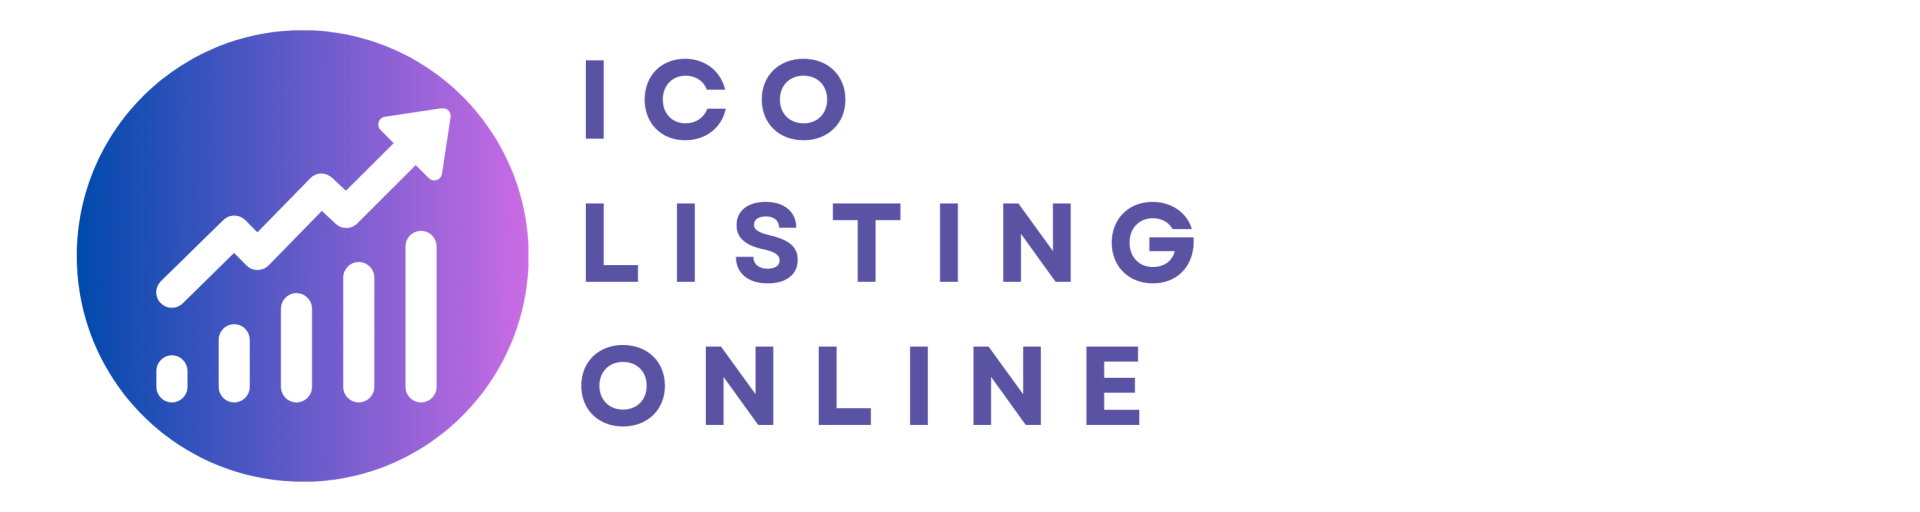 Which are the Best ICO Listing Websites Out There?